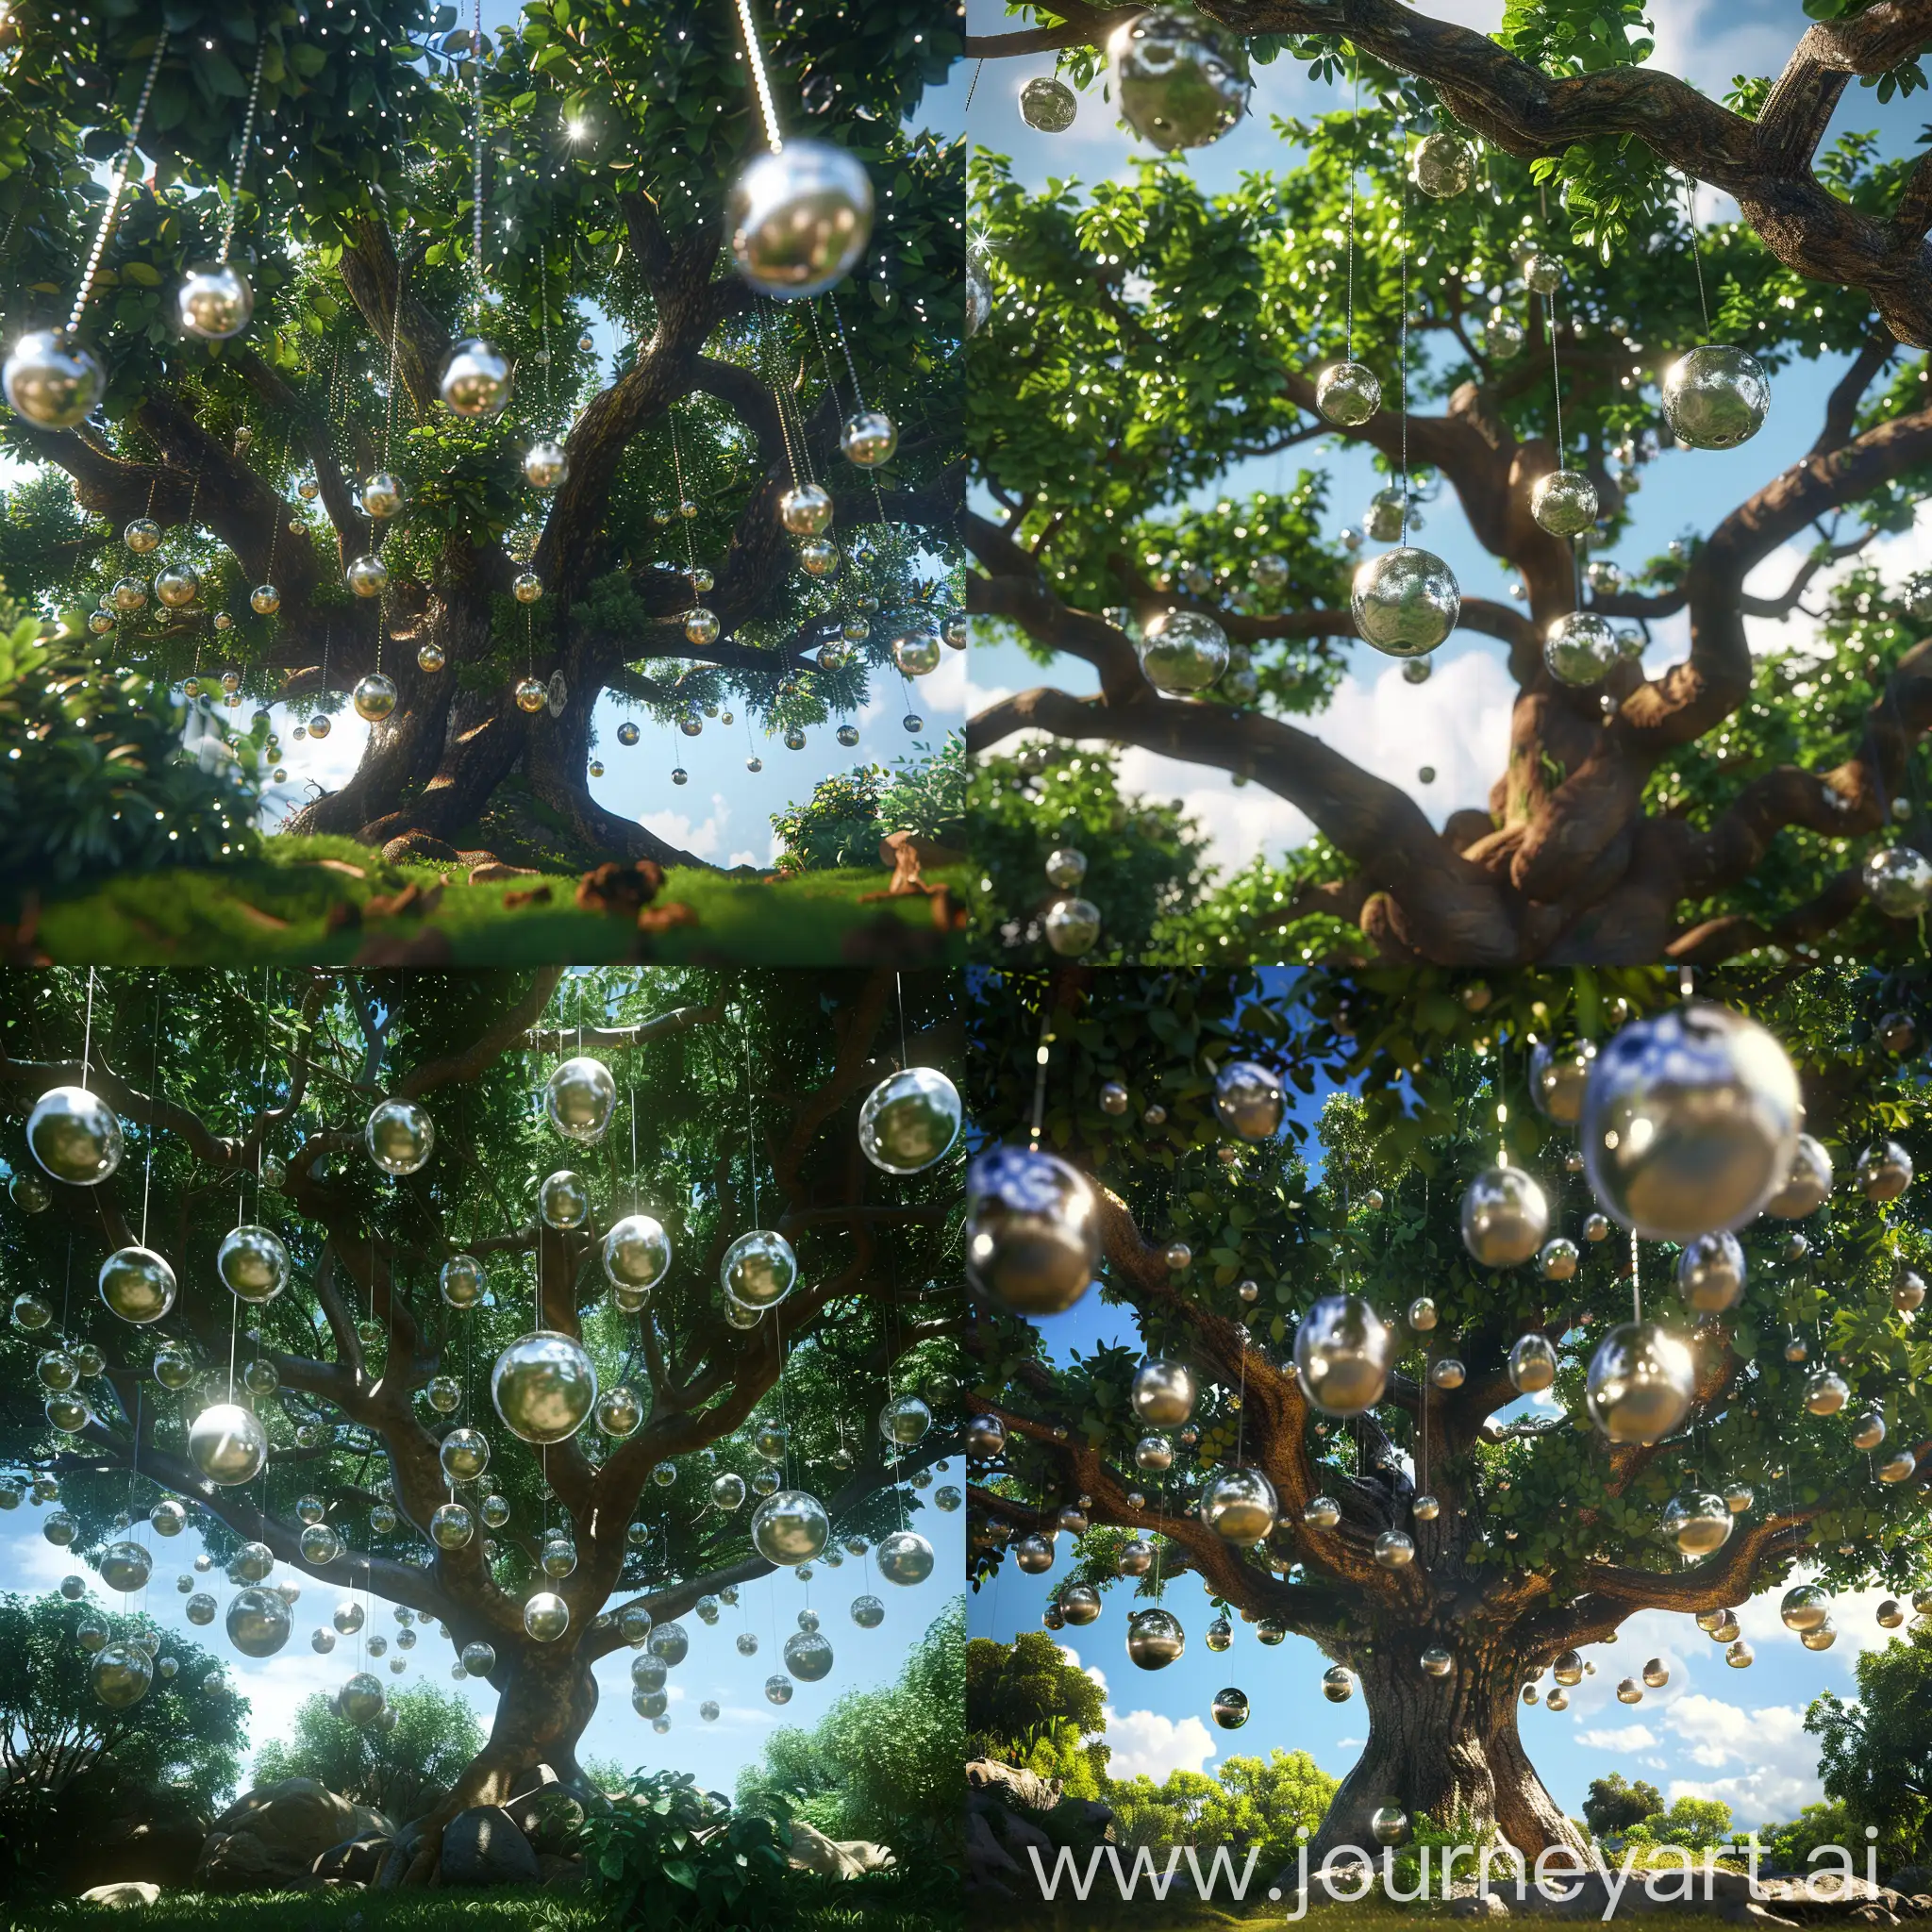 Garden-of-Eden-Tree-with-Silver-Apples-Heavenly-Realism-in-Lush-Paradise